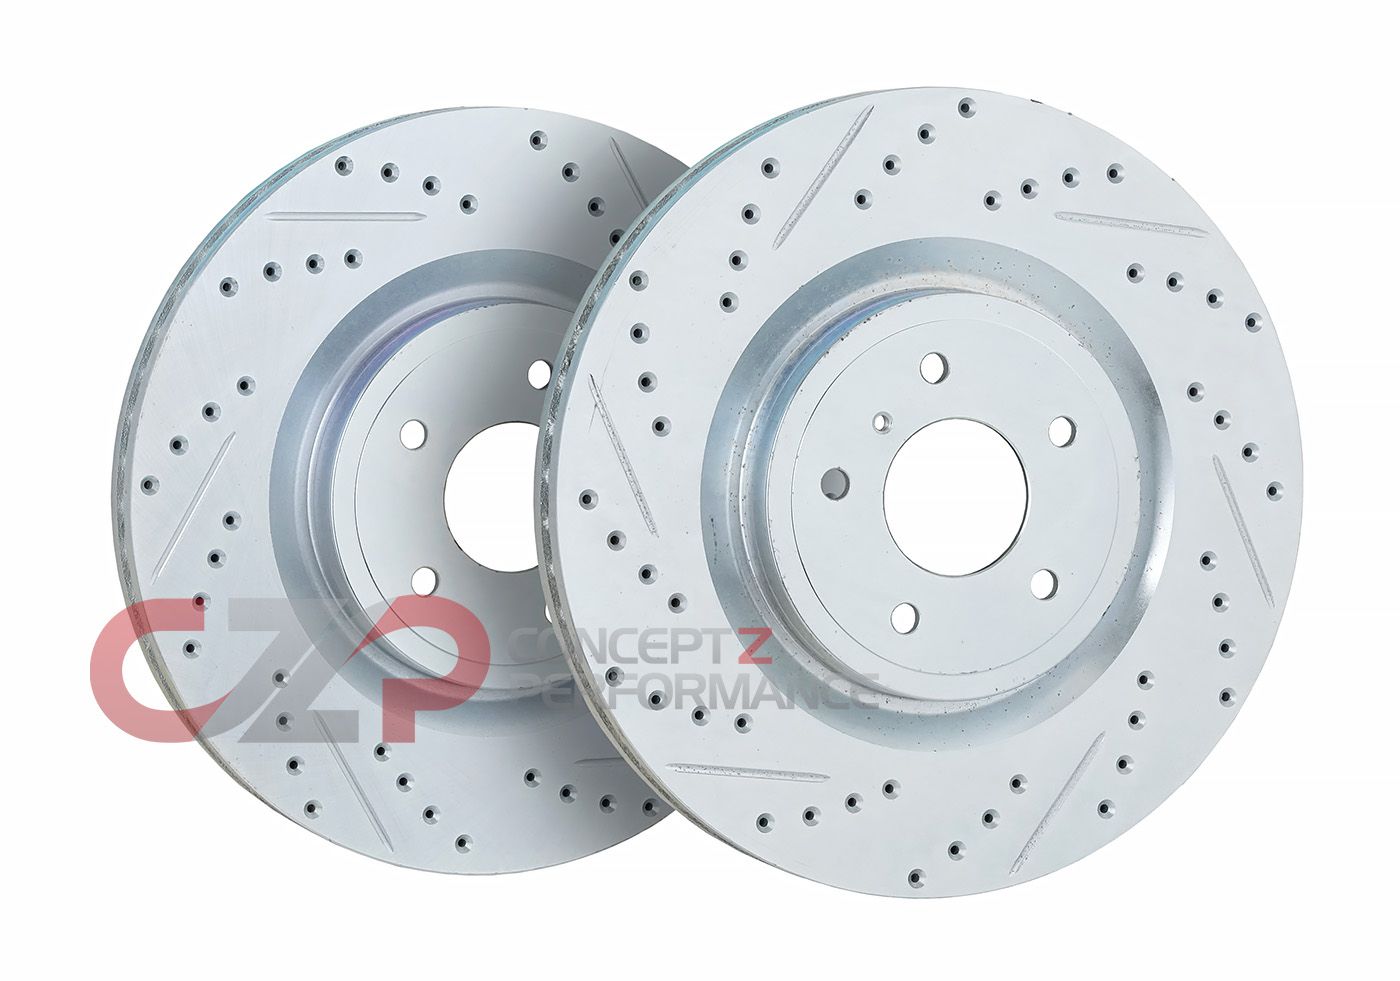 P2M Front Rotor Set, Zinc Plated, Drilled/Slotted For Sport Akebono - Nissan 370Z / Infiniti G37 Q50 Q60 Q70 M37 M56 FX50